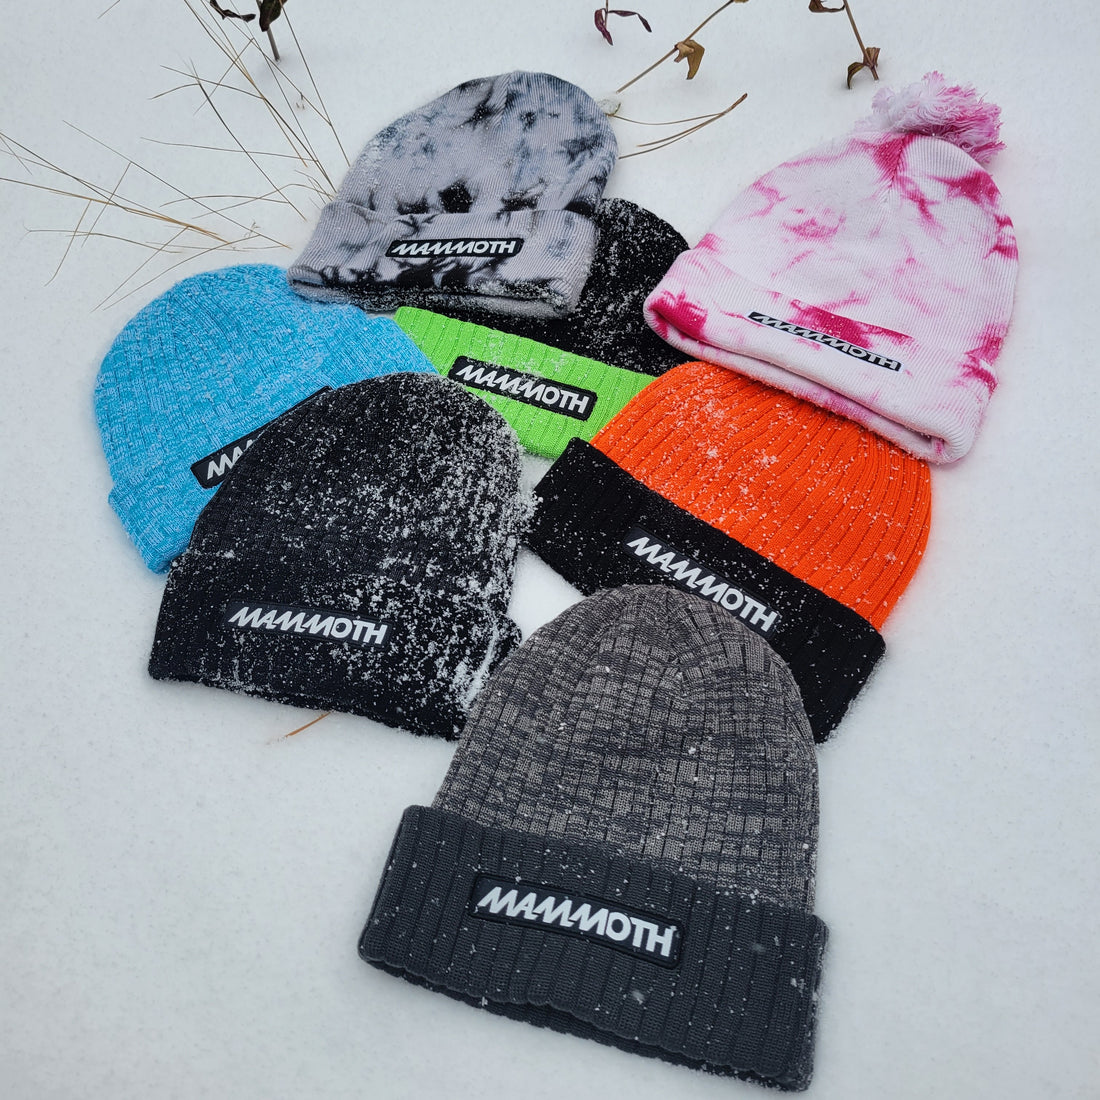 22/23 Mammoth Beanie in Stock Now!